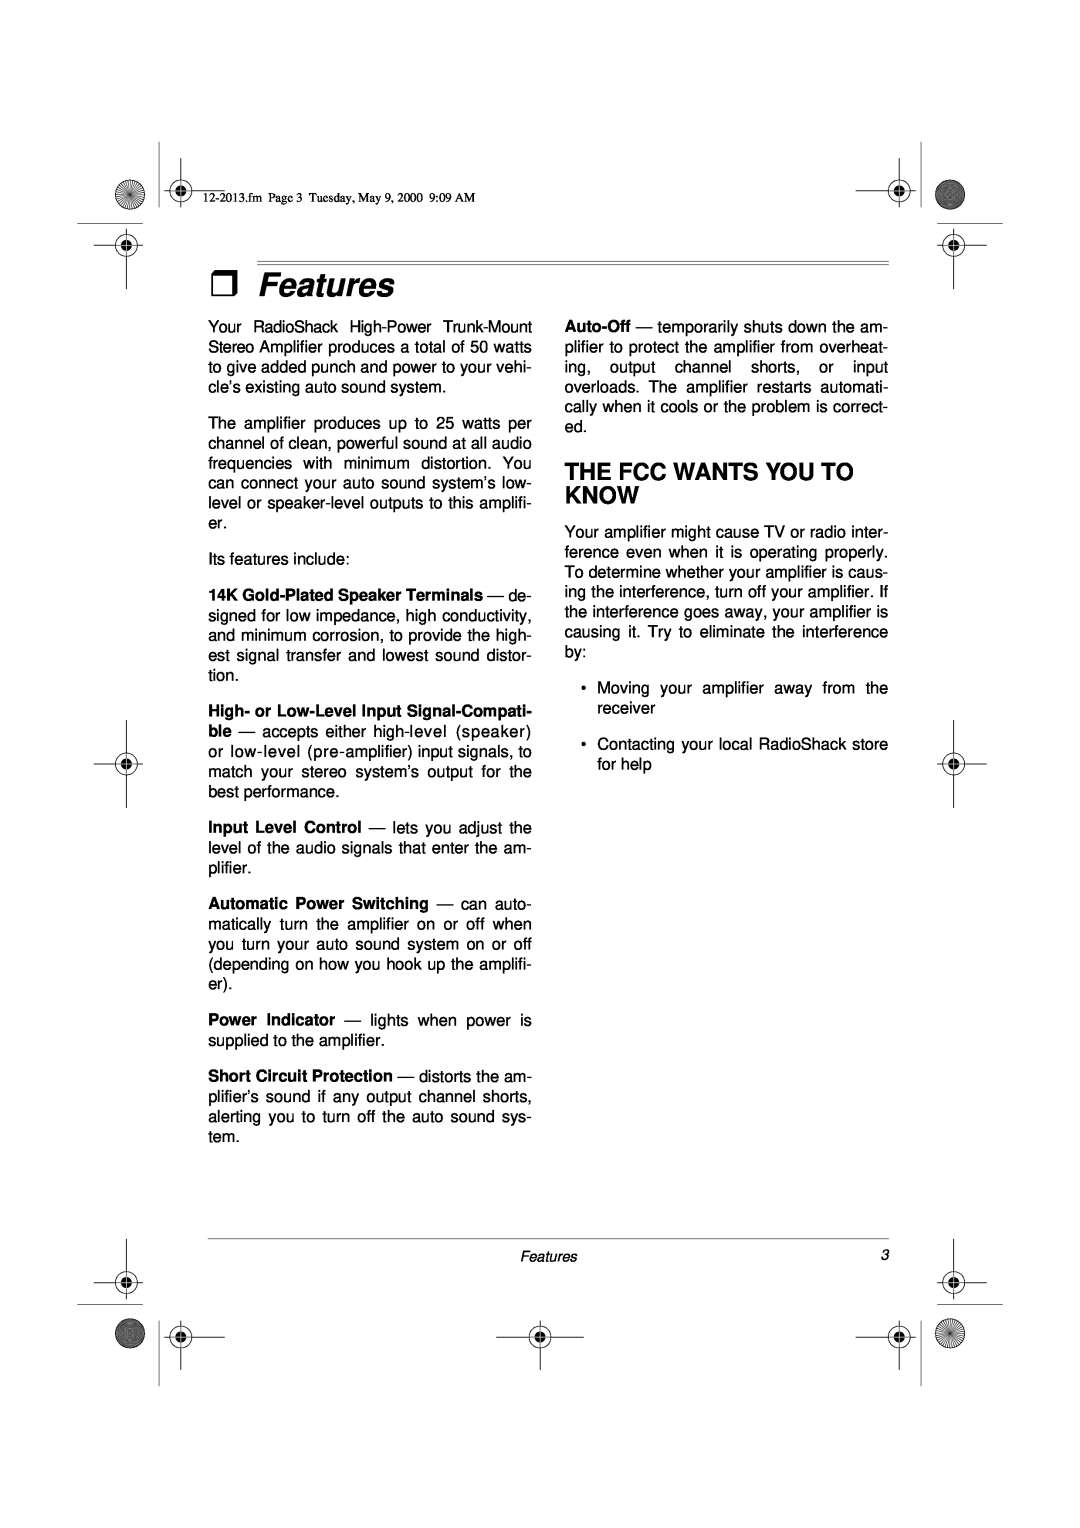 Radio Shack XL-50 owner manual ˆFeatures, The Fcc Wants You To Know 